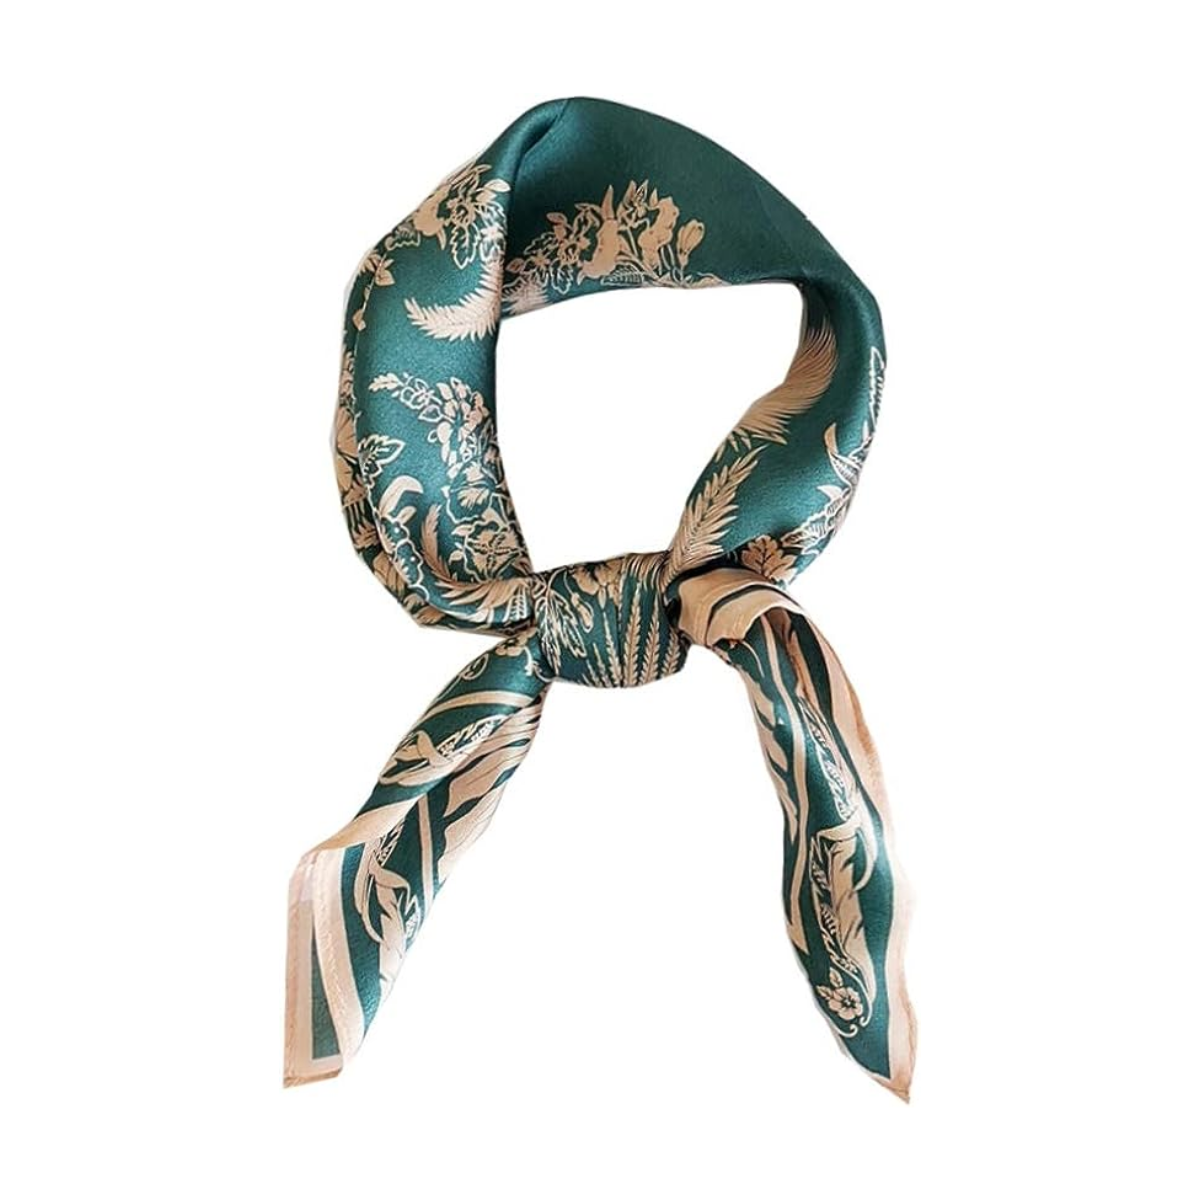 15. Silk Scarf or Tie: A Thoughtful and Unique 7th Anniversary Gift Idea